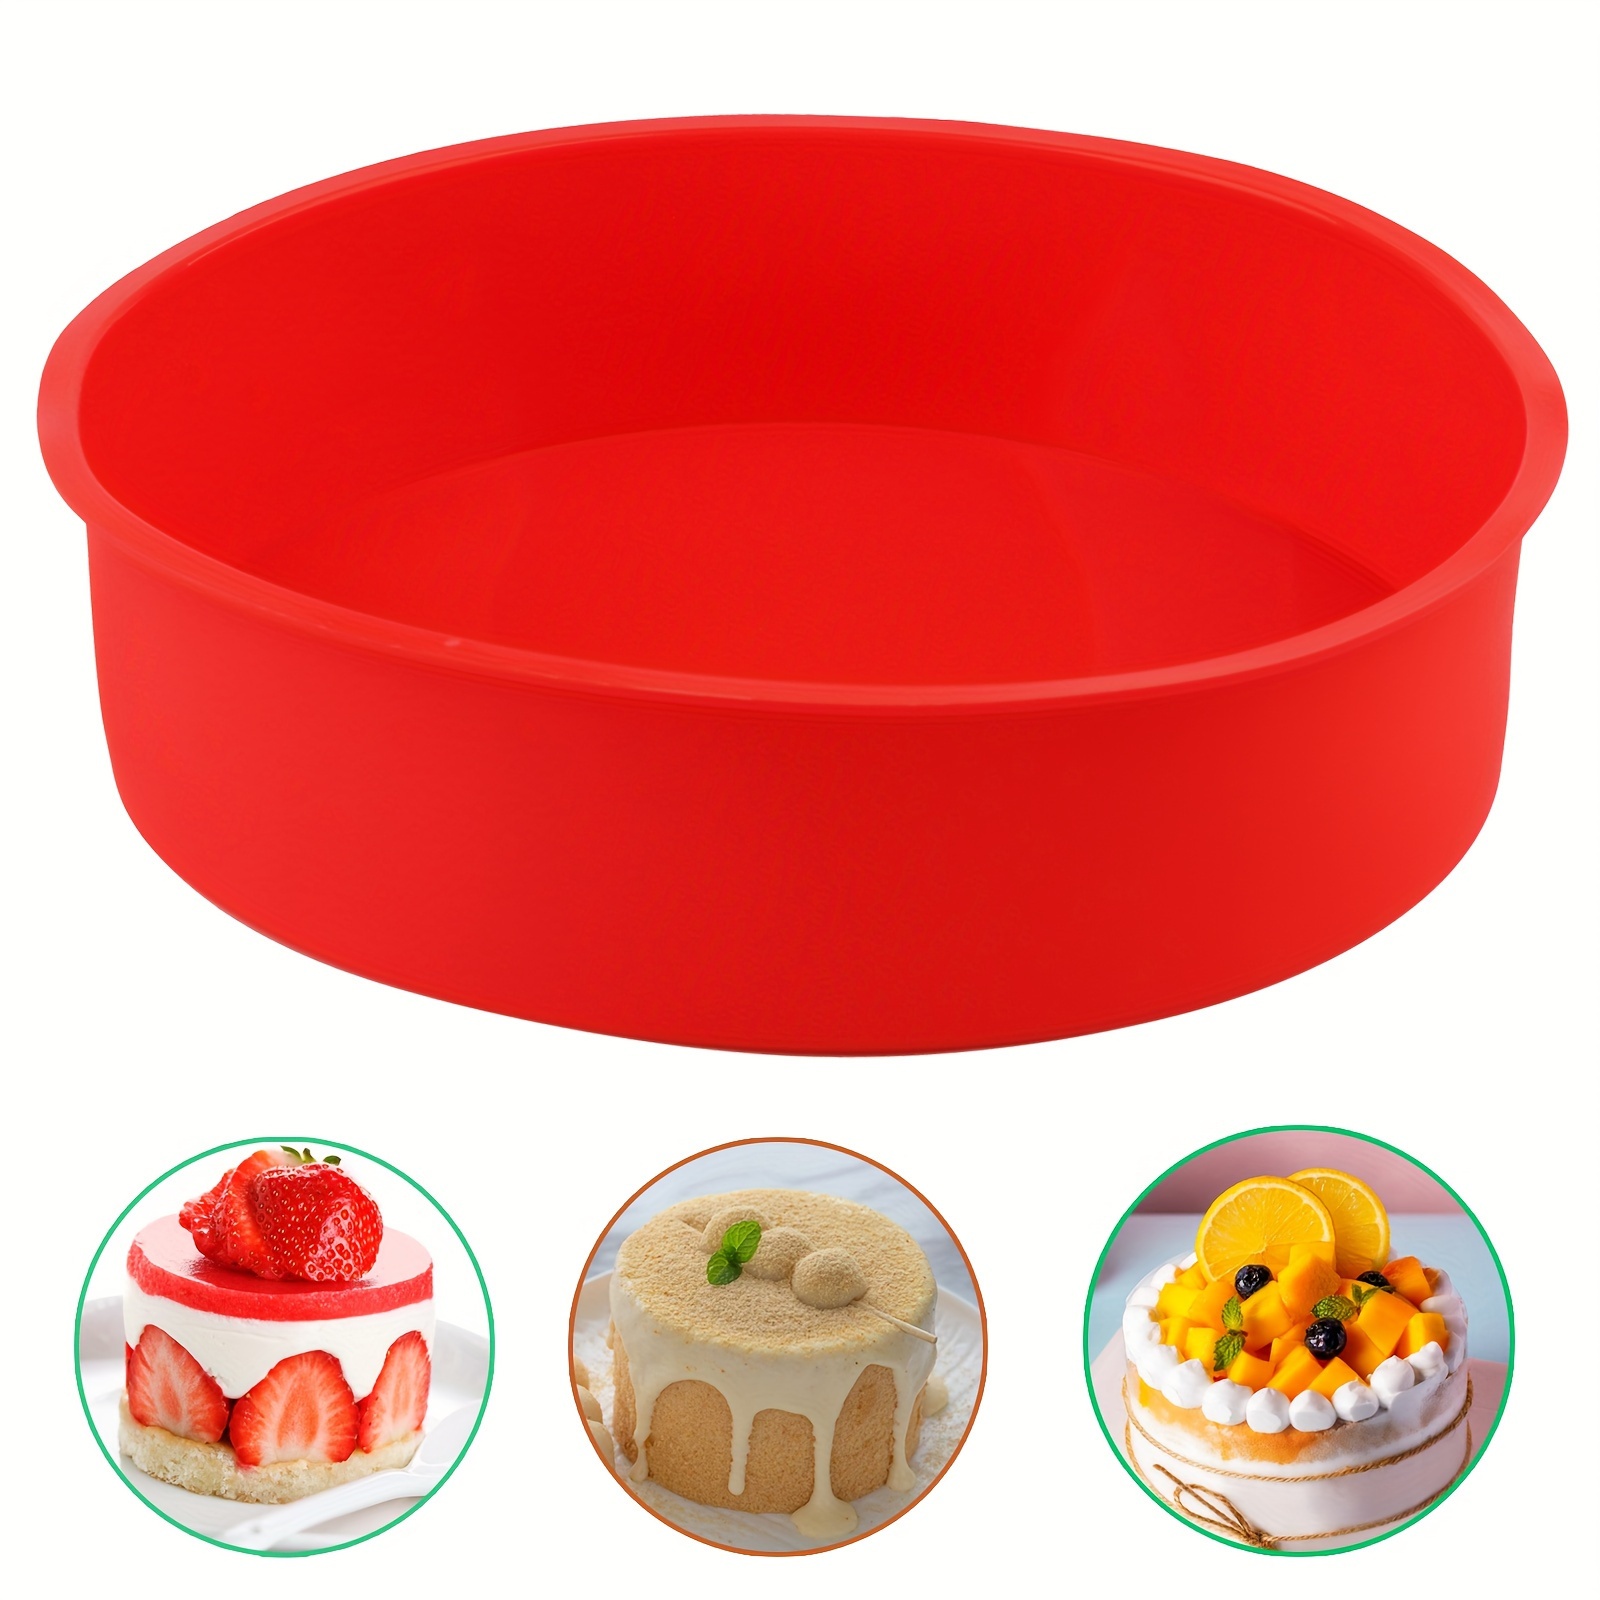 

1pc, 9.5 Inch Silicone Round Cake Pan, Non-stick, Baking Mold, Perfect Bakeware For Cake, Pudding, Gelatin, Bread, Birthday Party